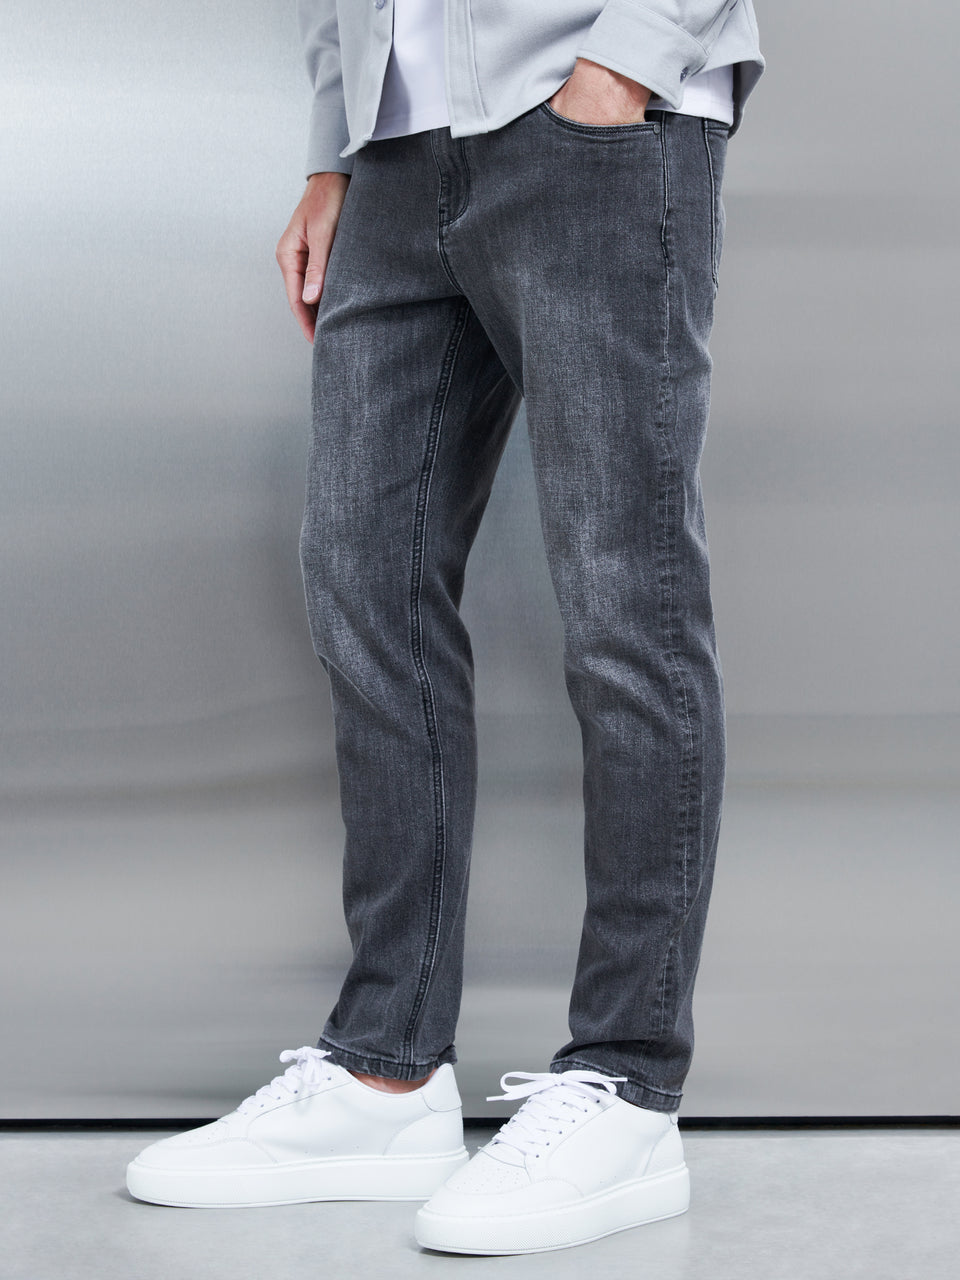 Relaxed Fit Denim Jeans in Grey Wash